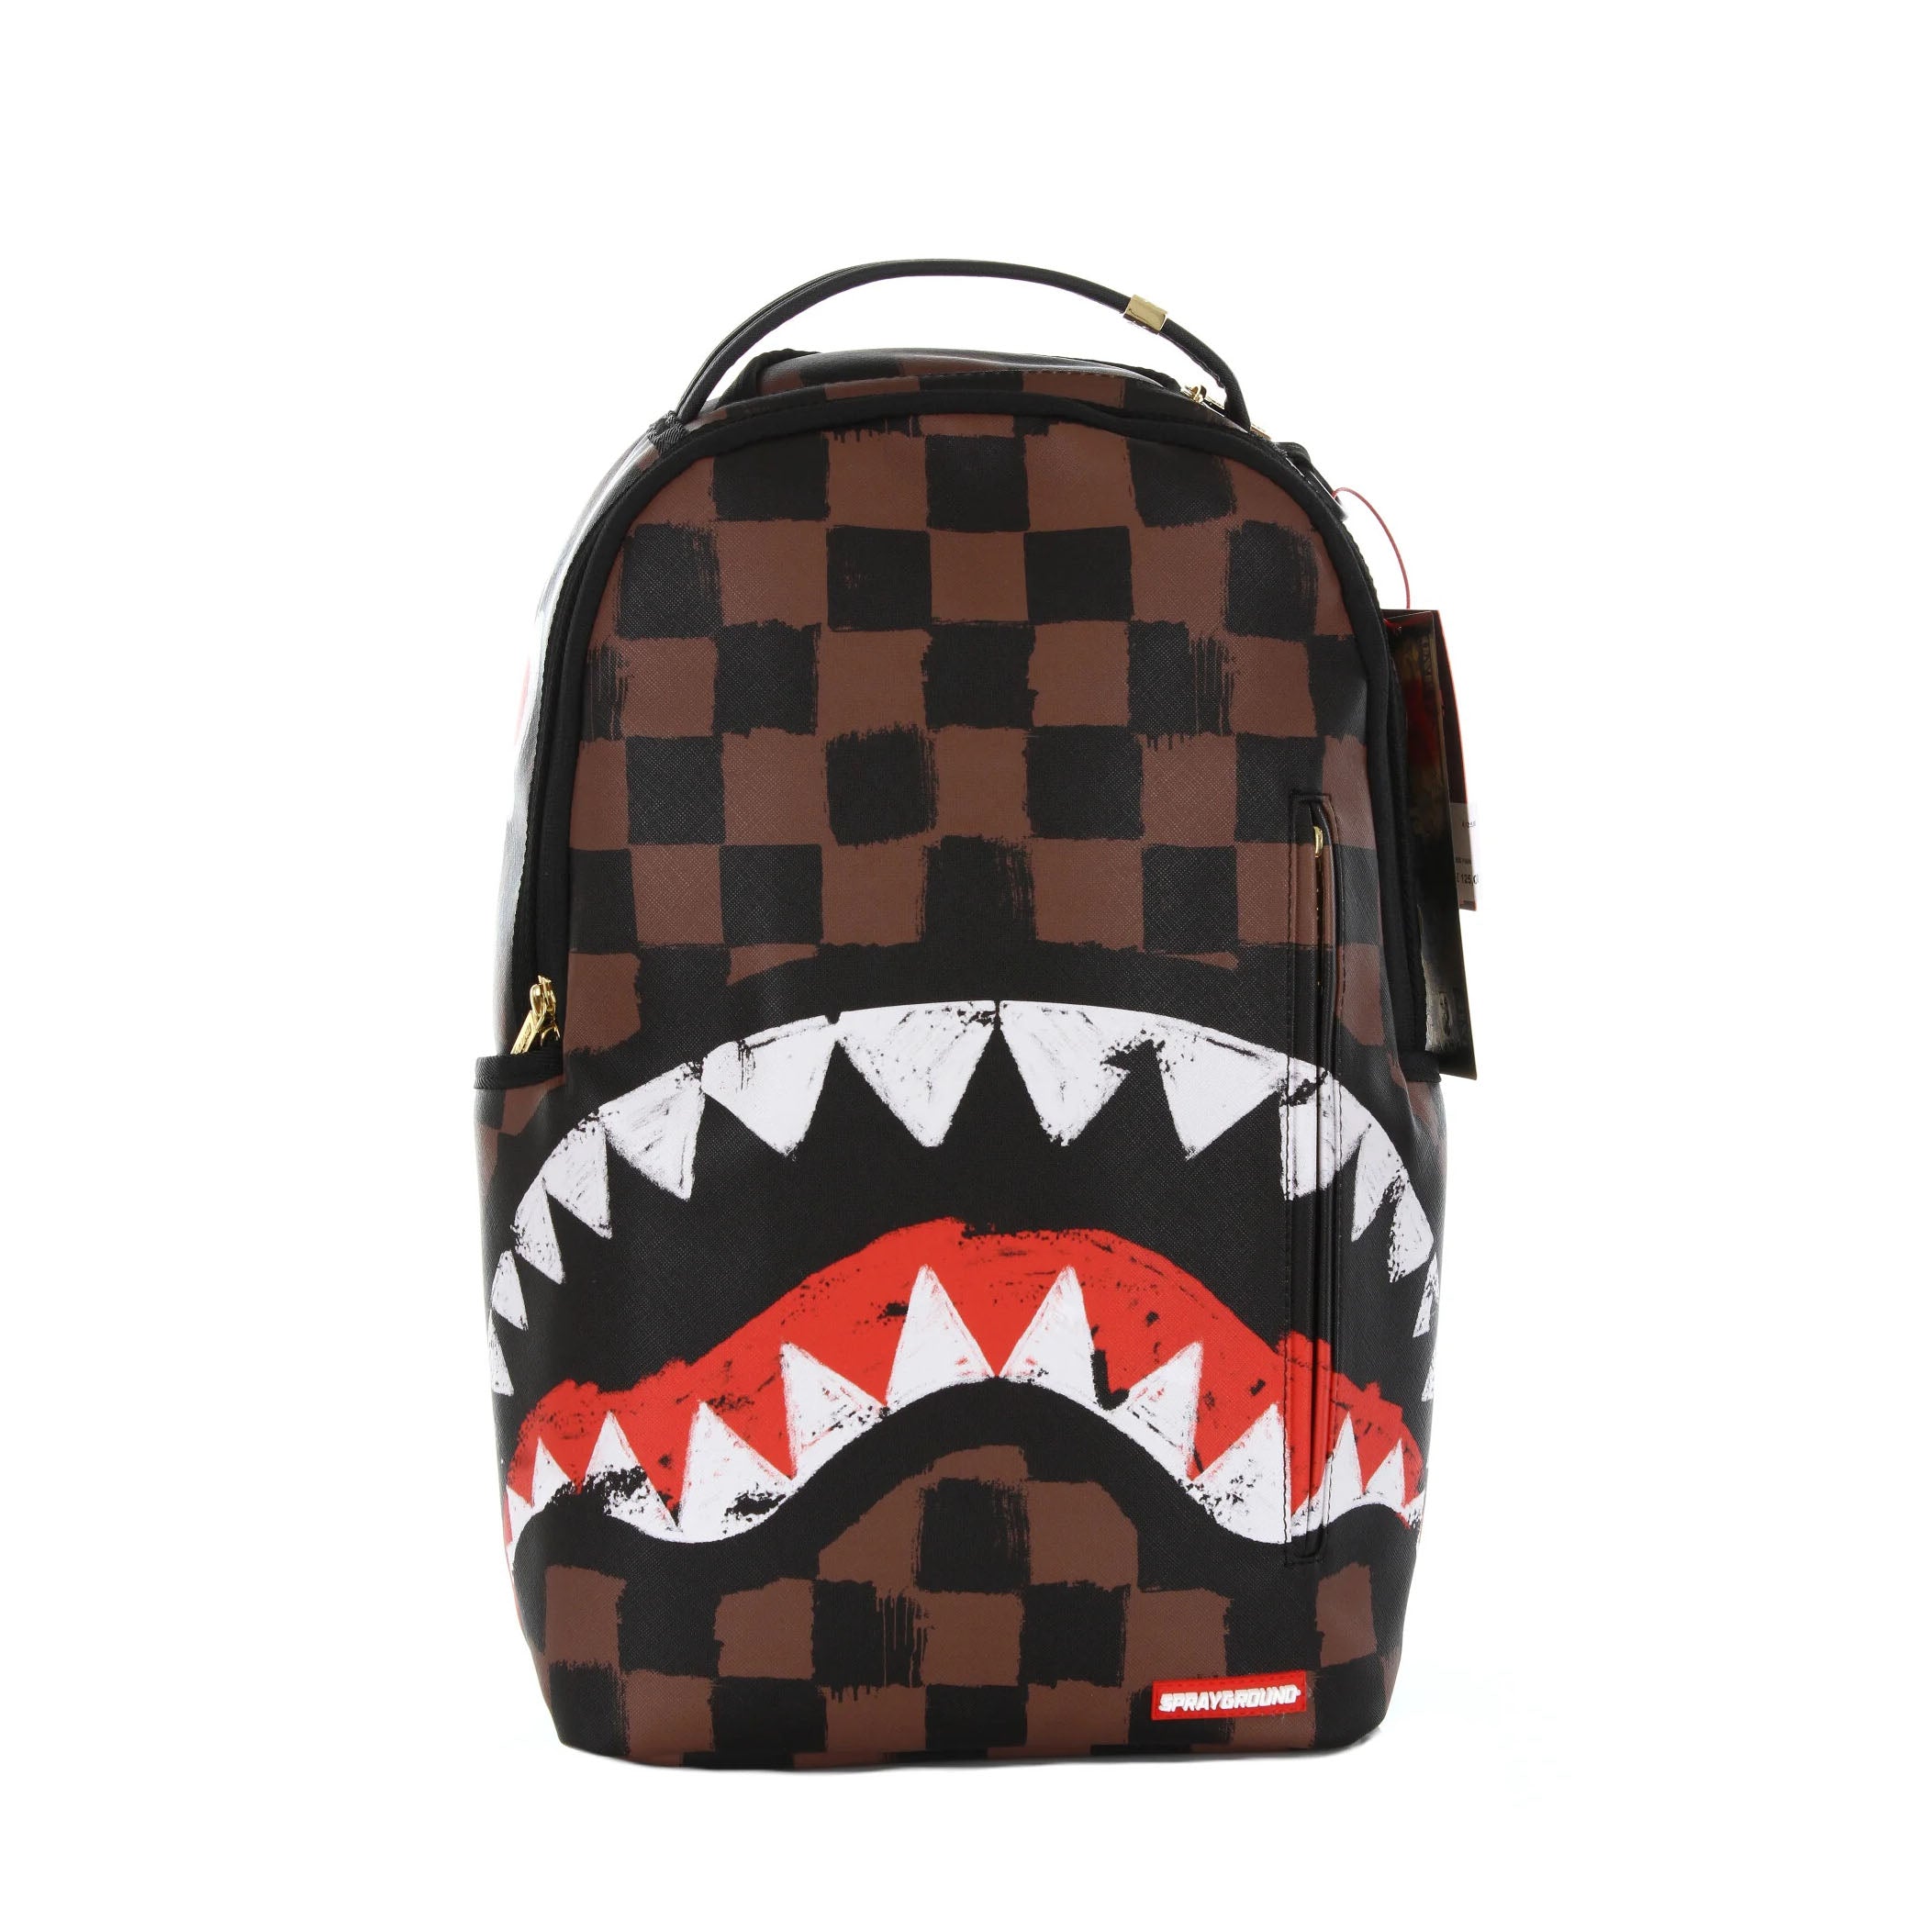 Sharks in paris painted dlxvf backpack